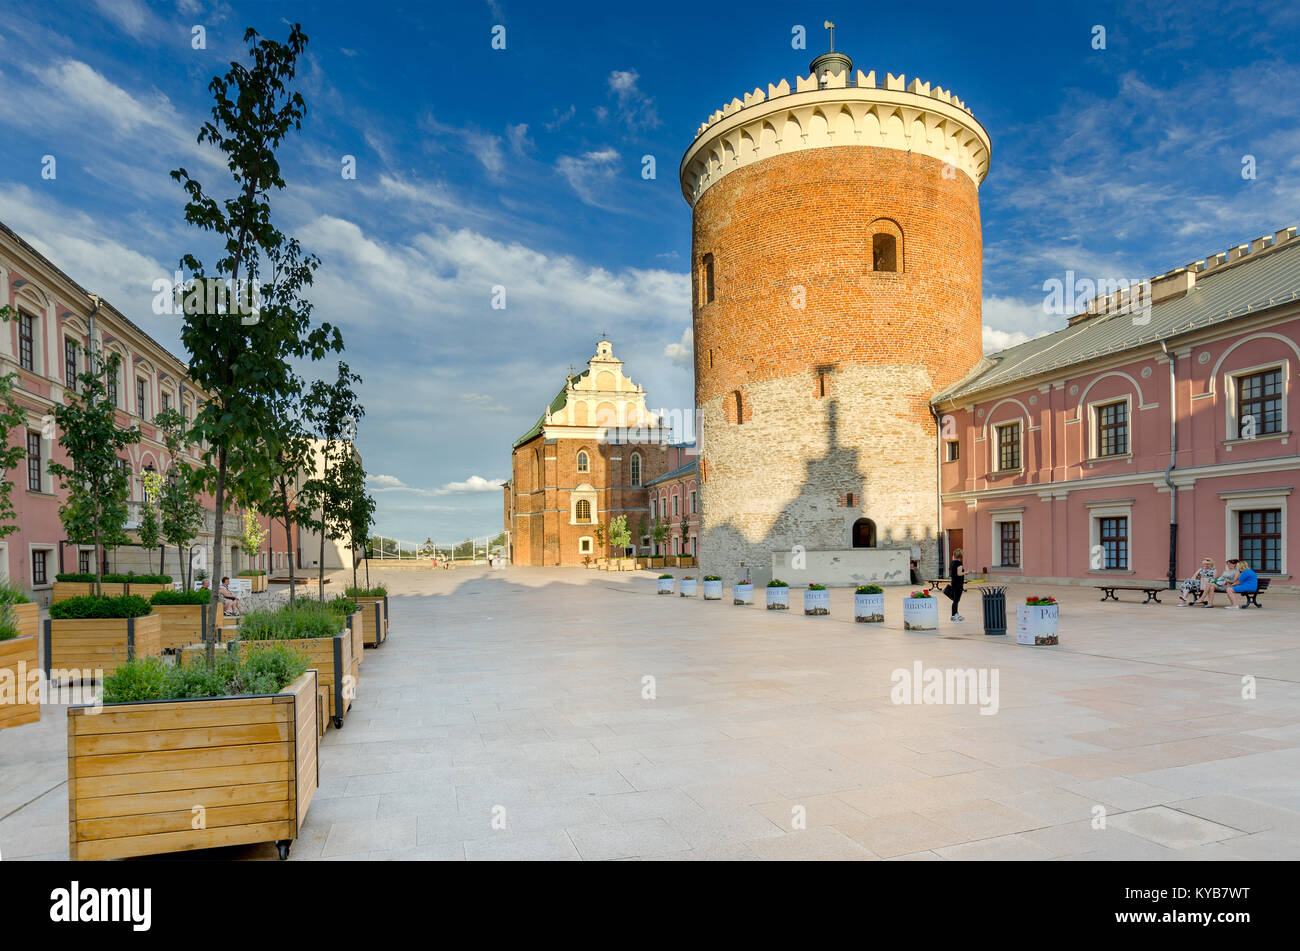 Royal castle in Lublin, Poland, Europe Stock Photo